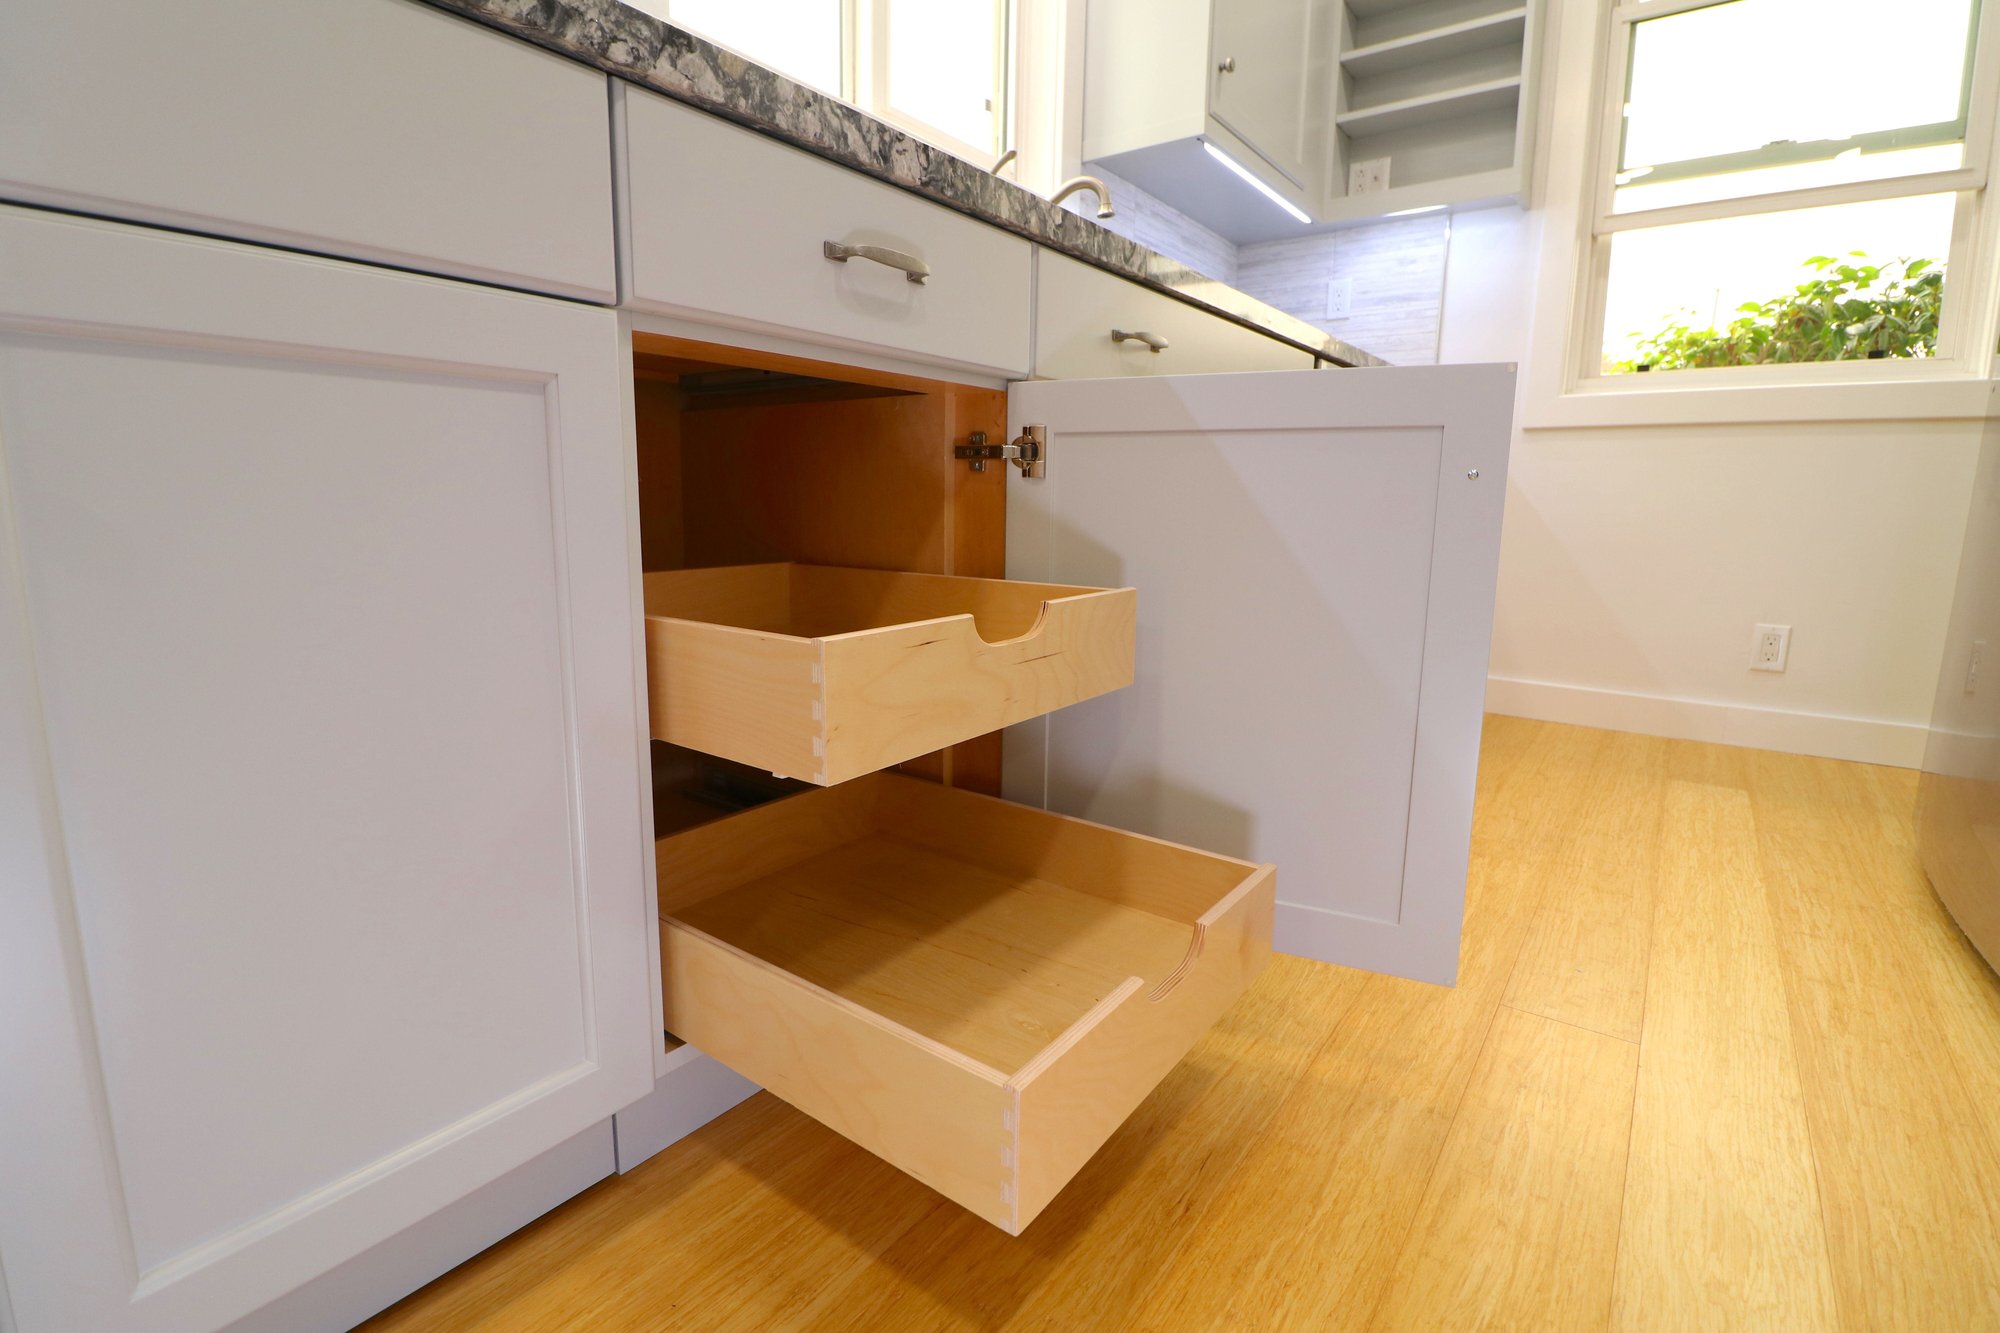 Torrance Kitchen Remodel - Contractor - Rev a Shelf Pull Out